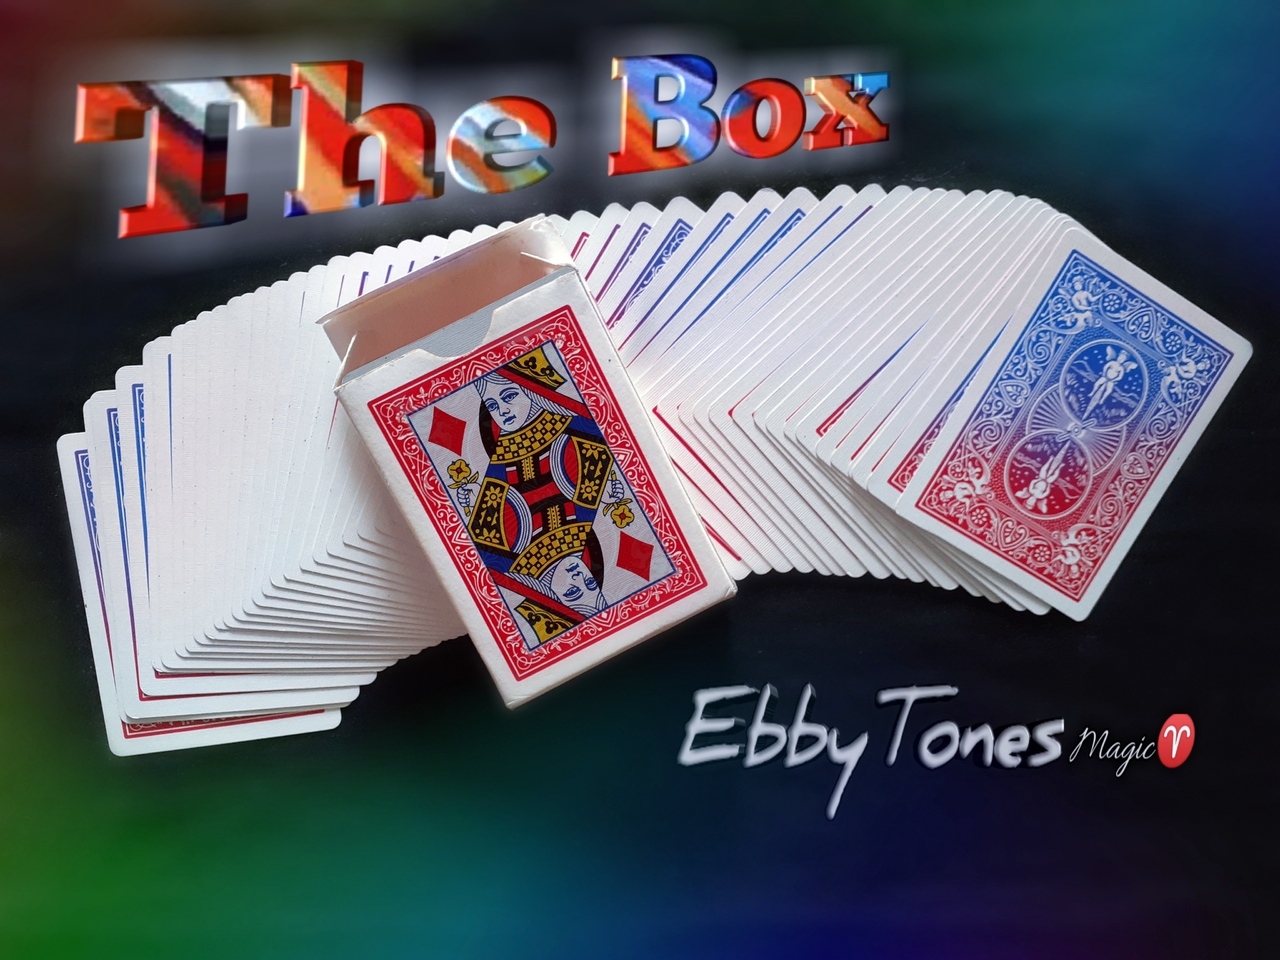 The Box by Ebby Tones (MP4 Video Download)